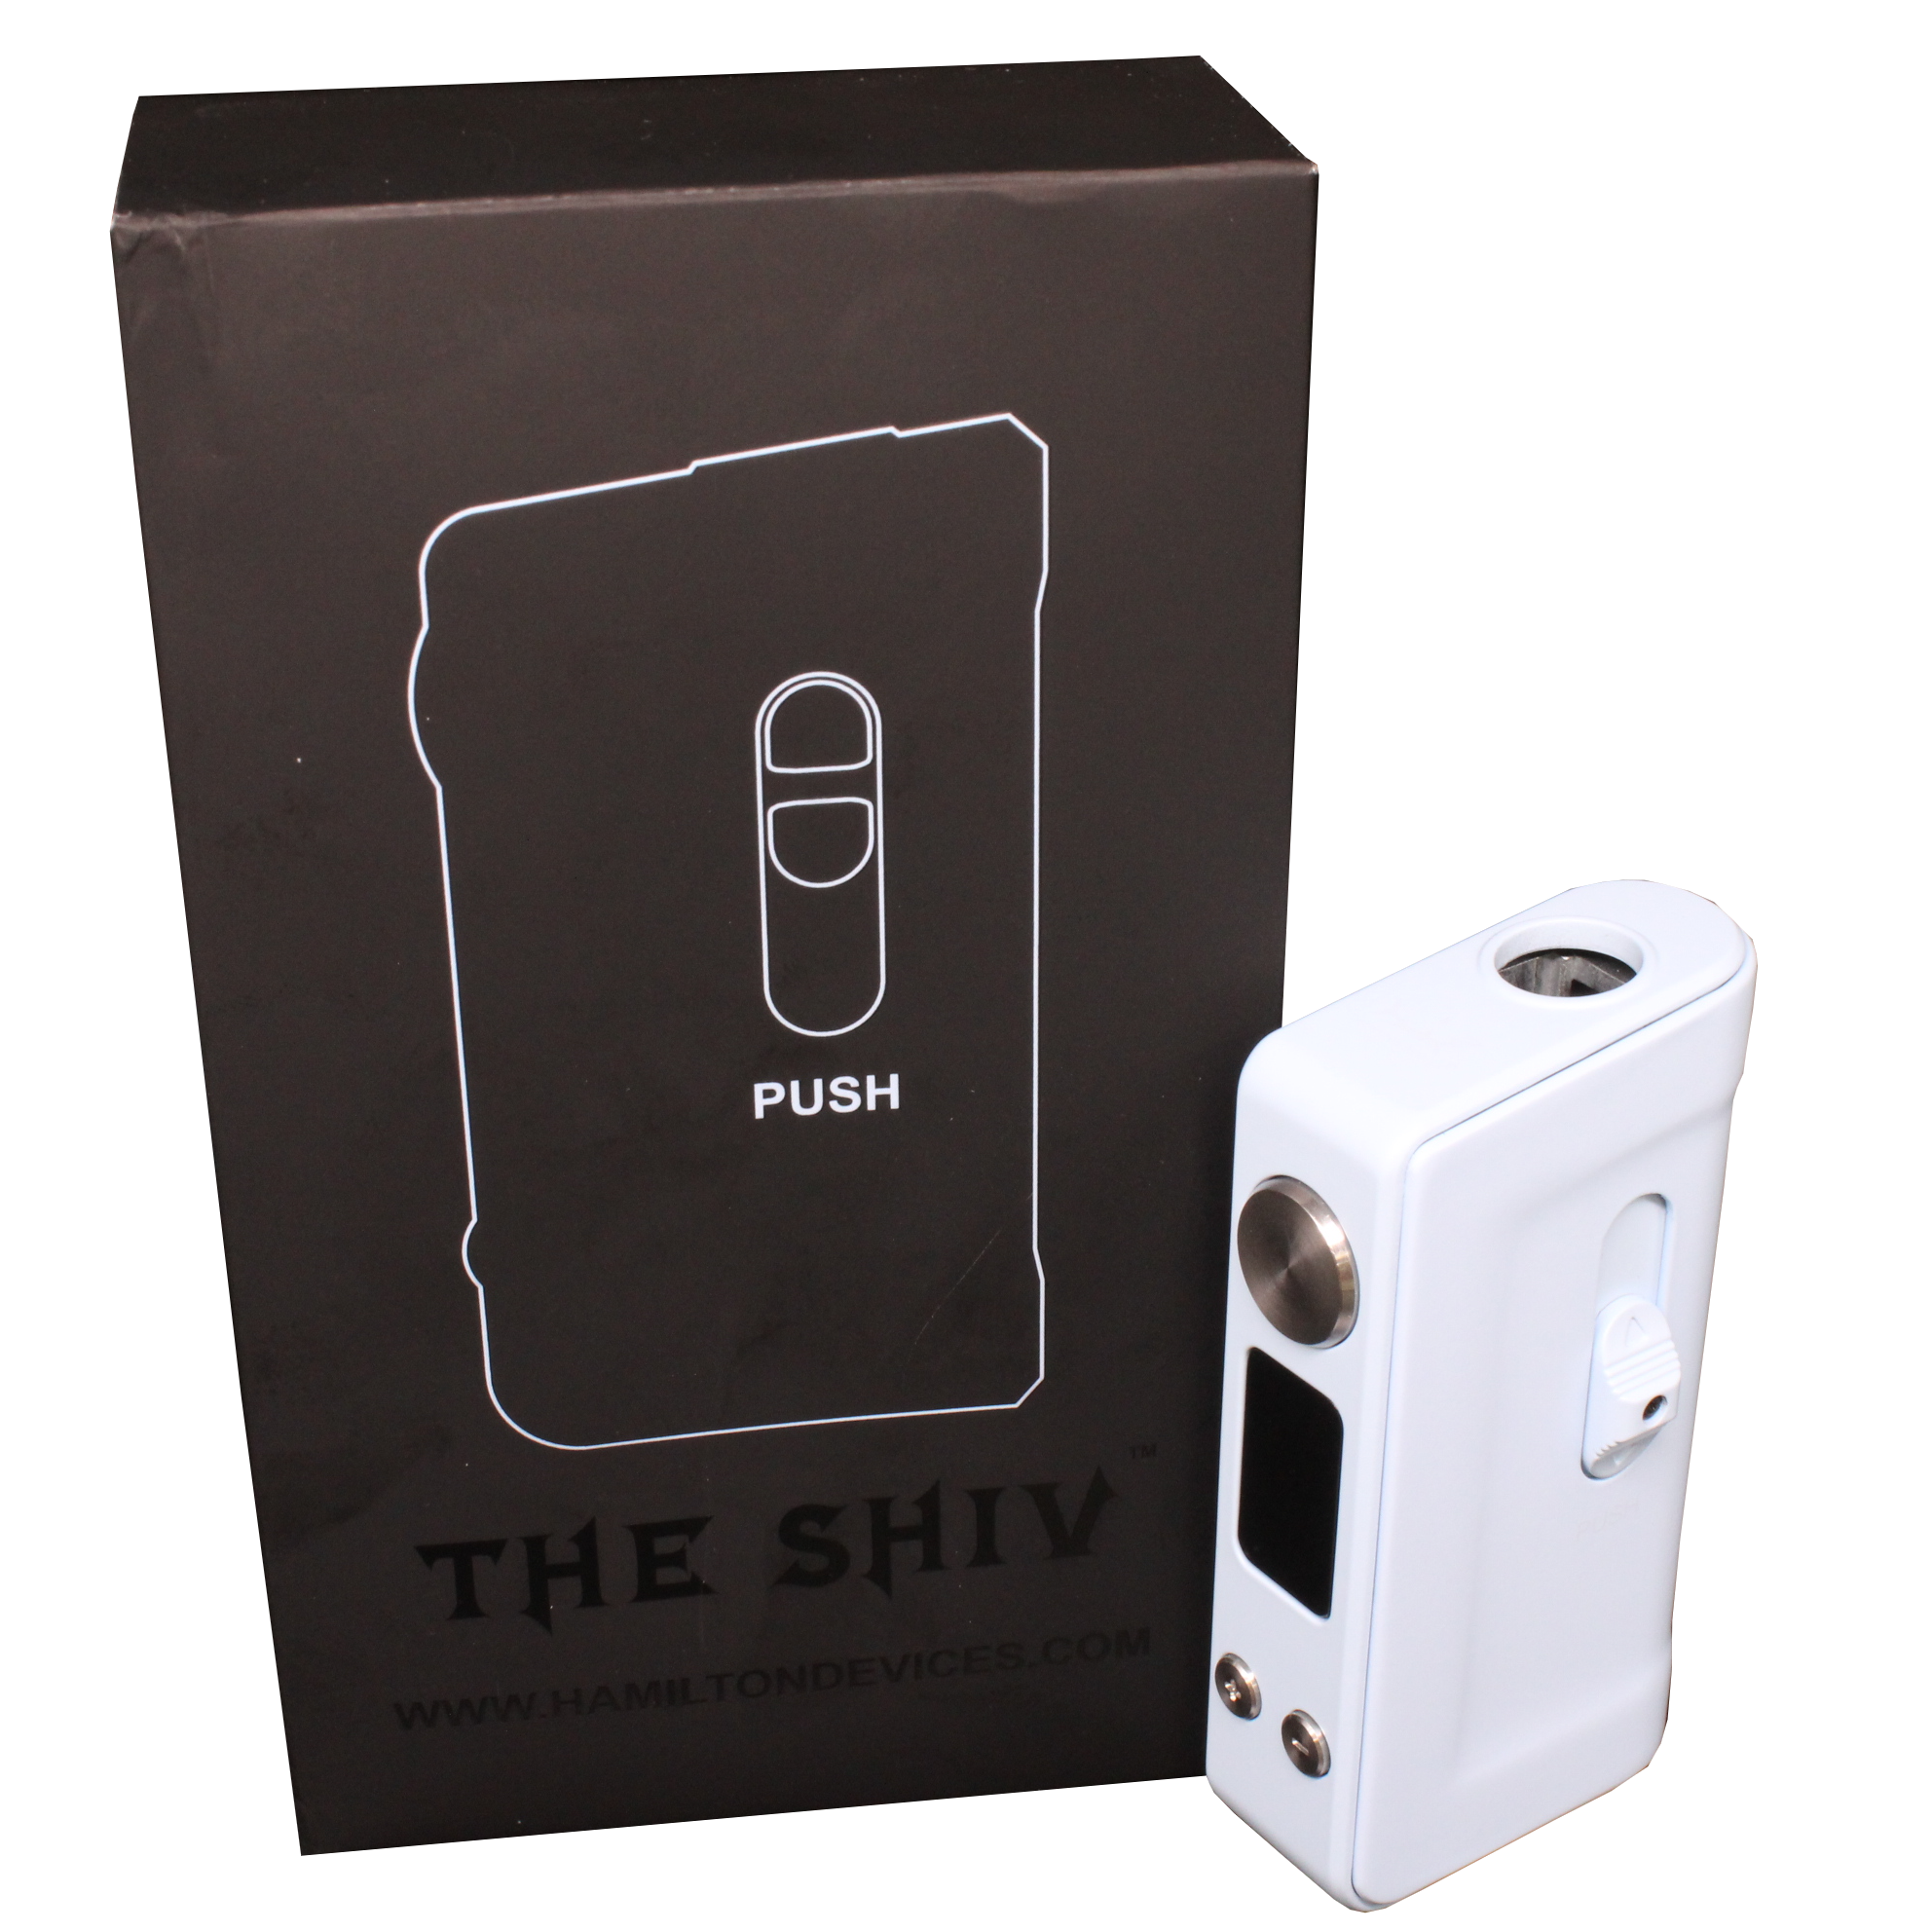 HAMILTON DEVICES THE SHIV VARIABLE VOLTAGE BATTERY